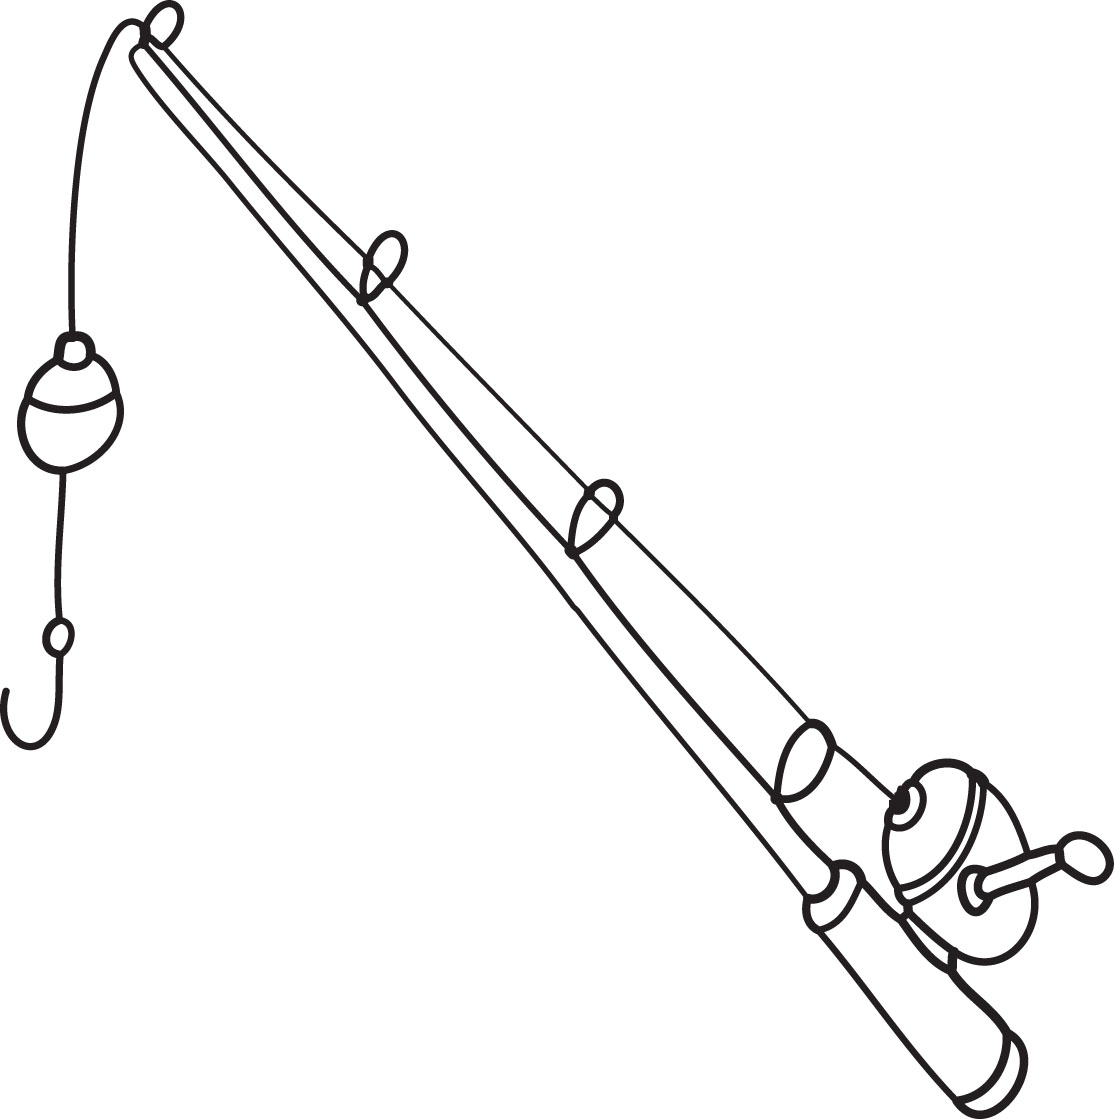 Worm clipart fishing equipment. Black and white free